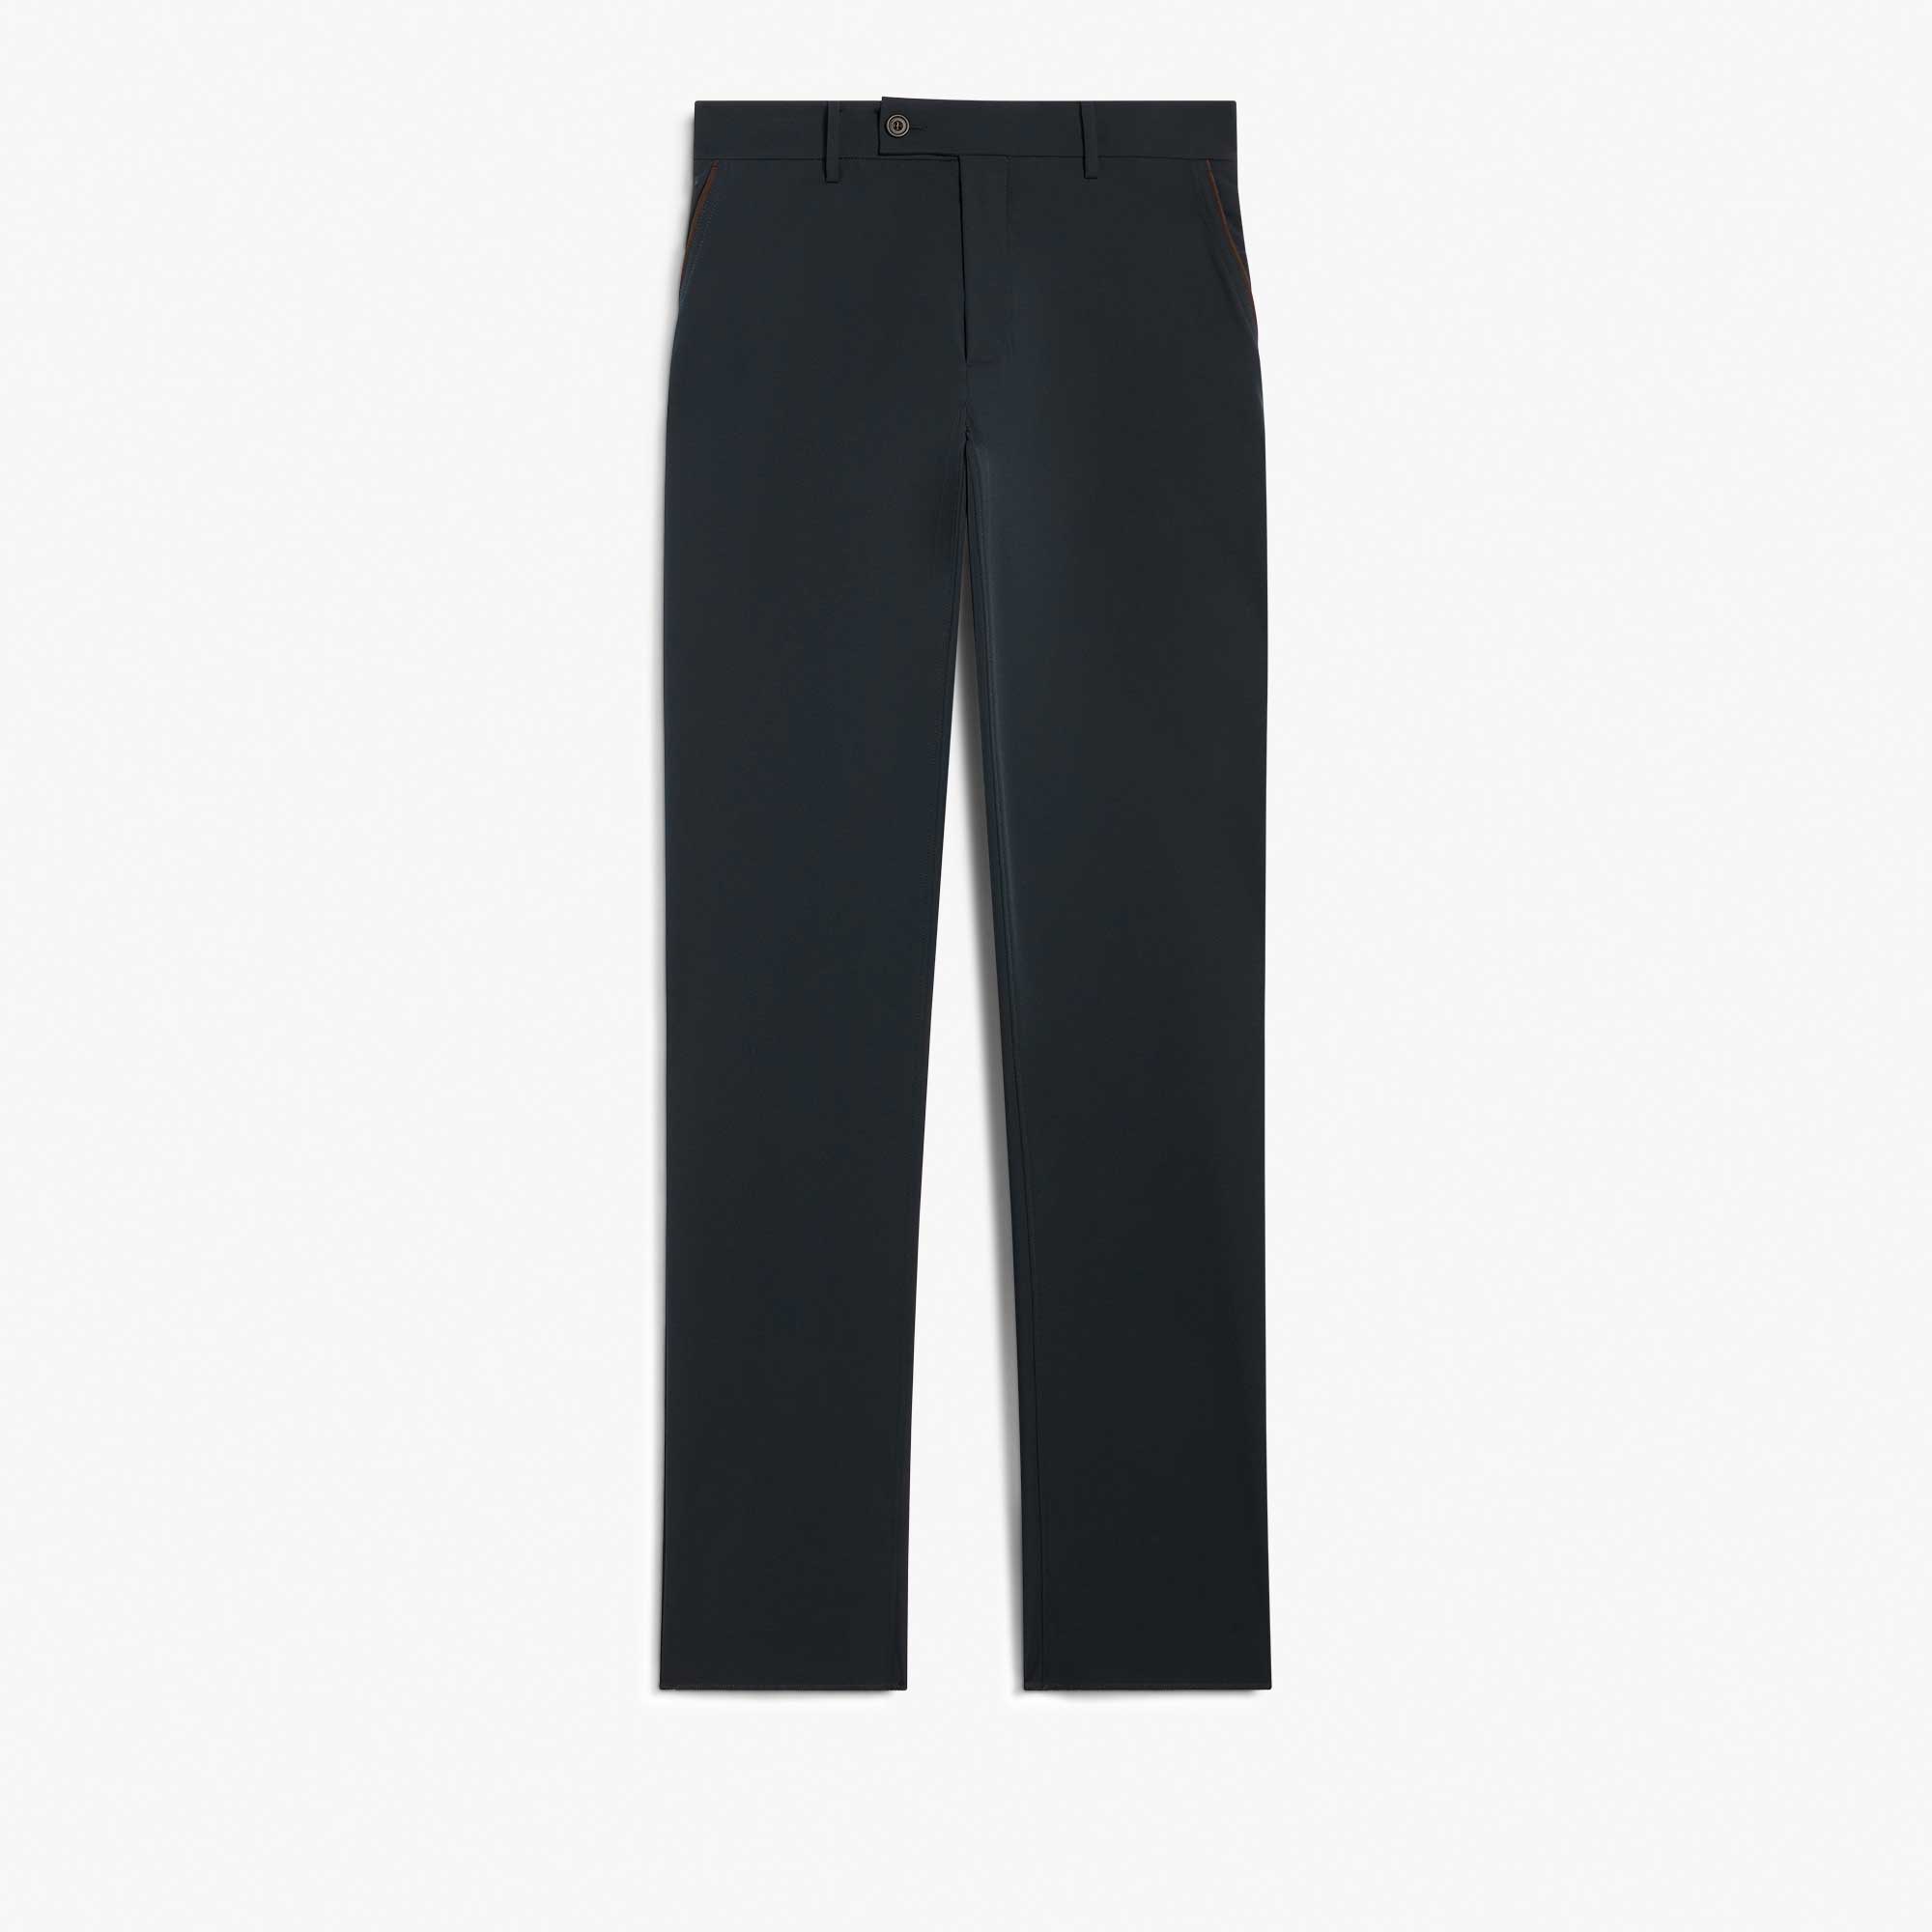 Active Technical Pants, COLD NIGHT BLUE, hi-res